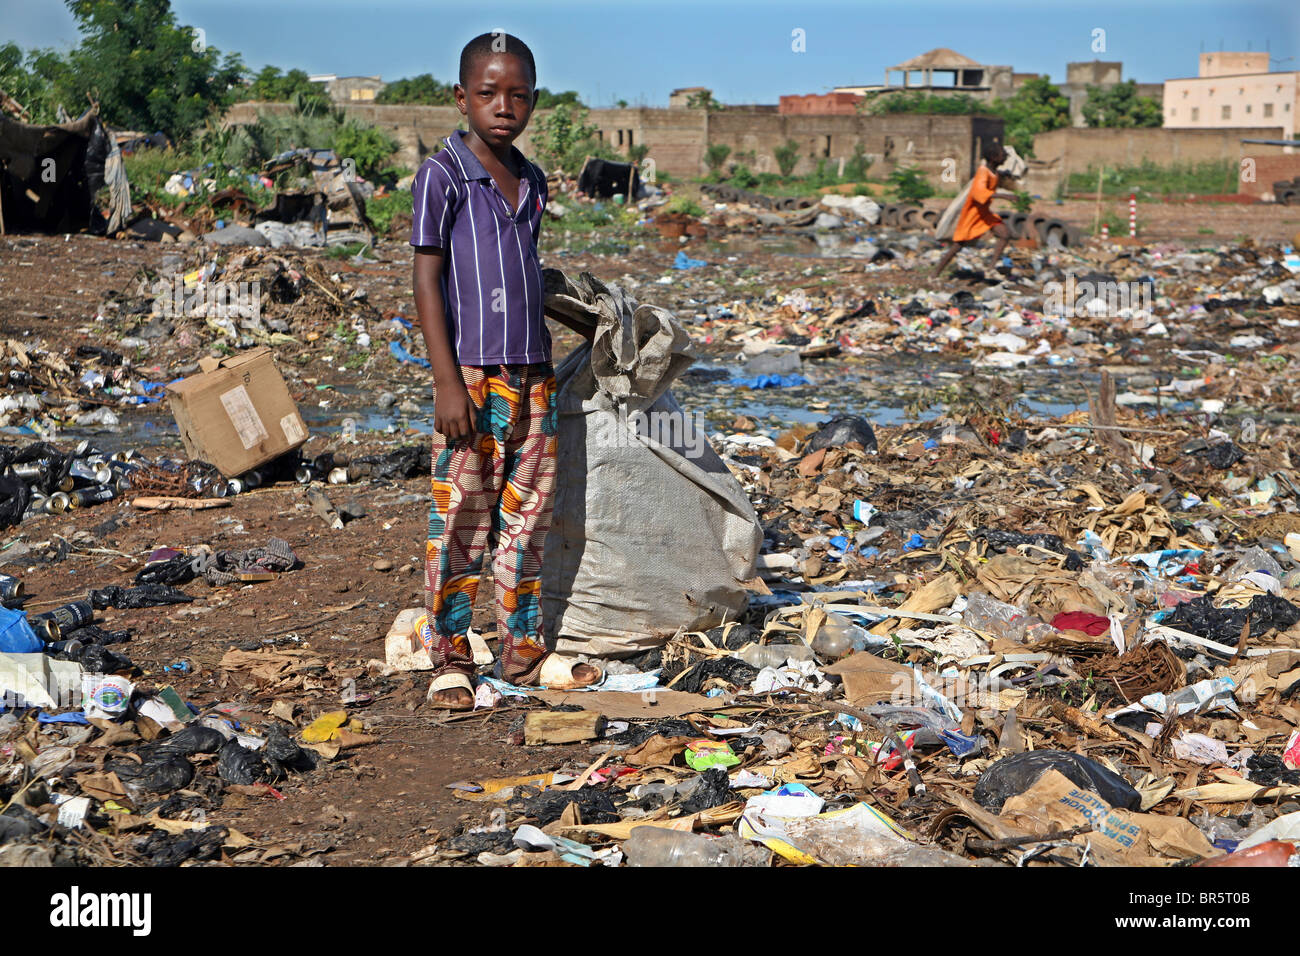 A young boy scavenges through a waste dump looking for anything plastic that he can sell for recycling, Bamako, Mali. Stock Photo